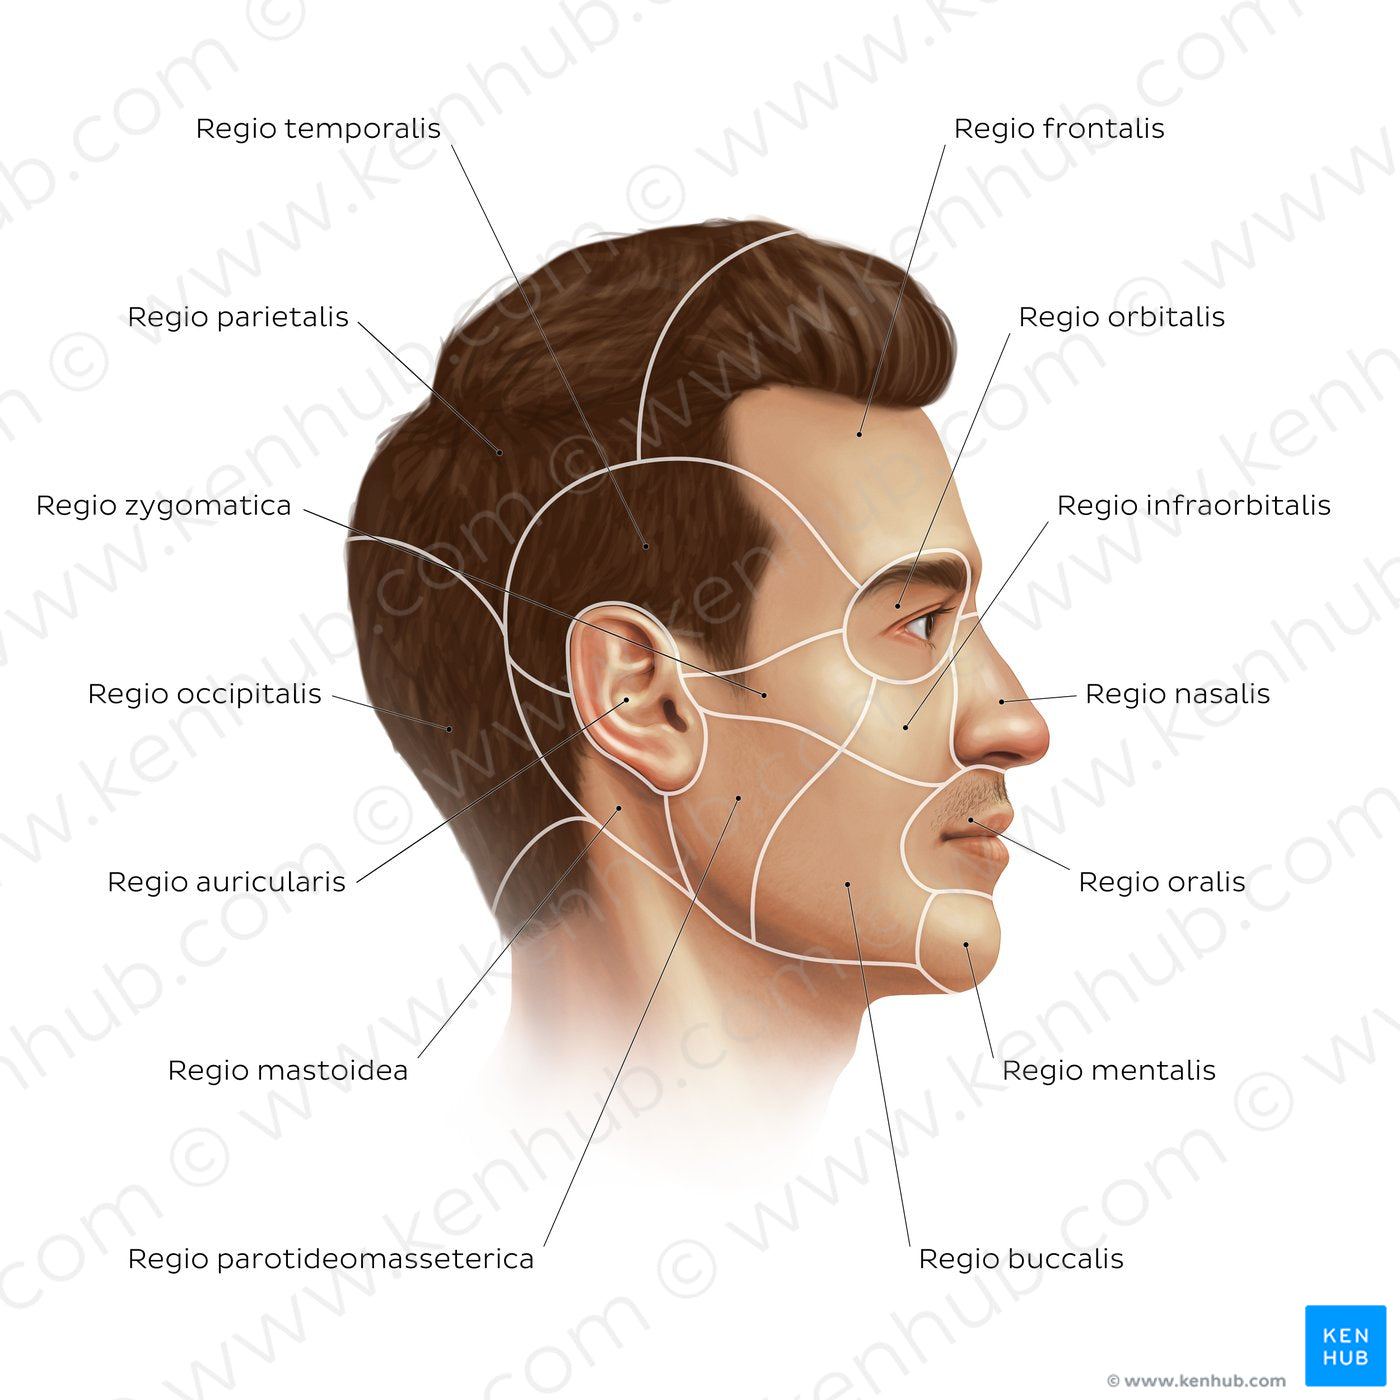 Regions of the head and face (Latin)